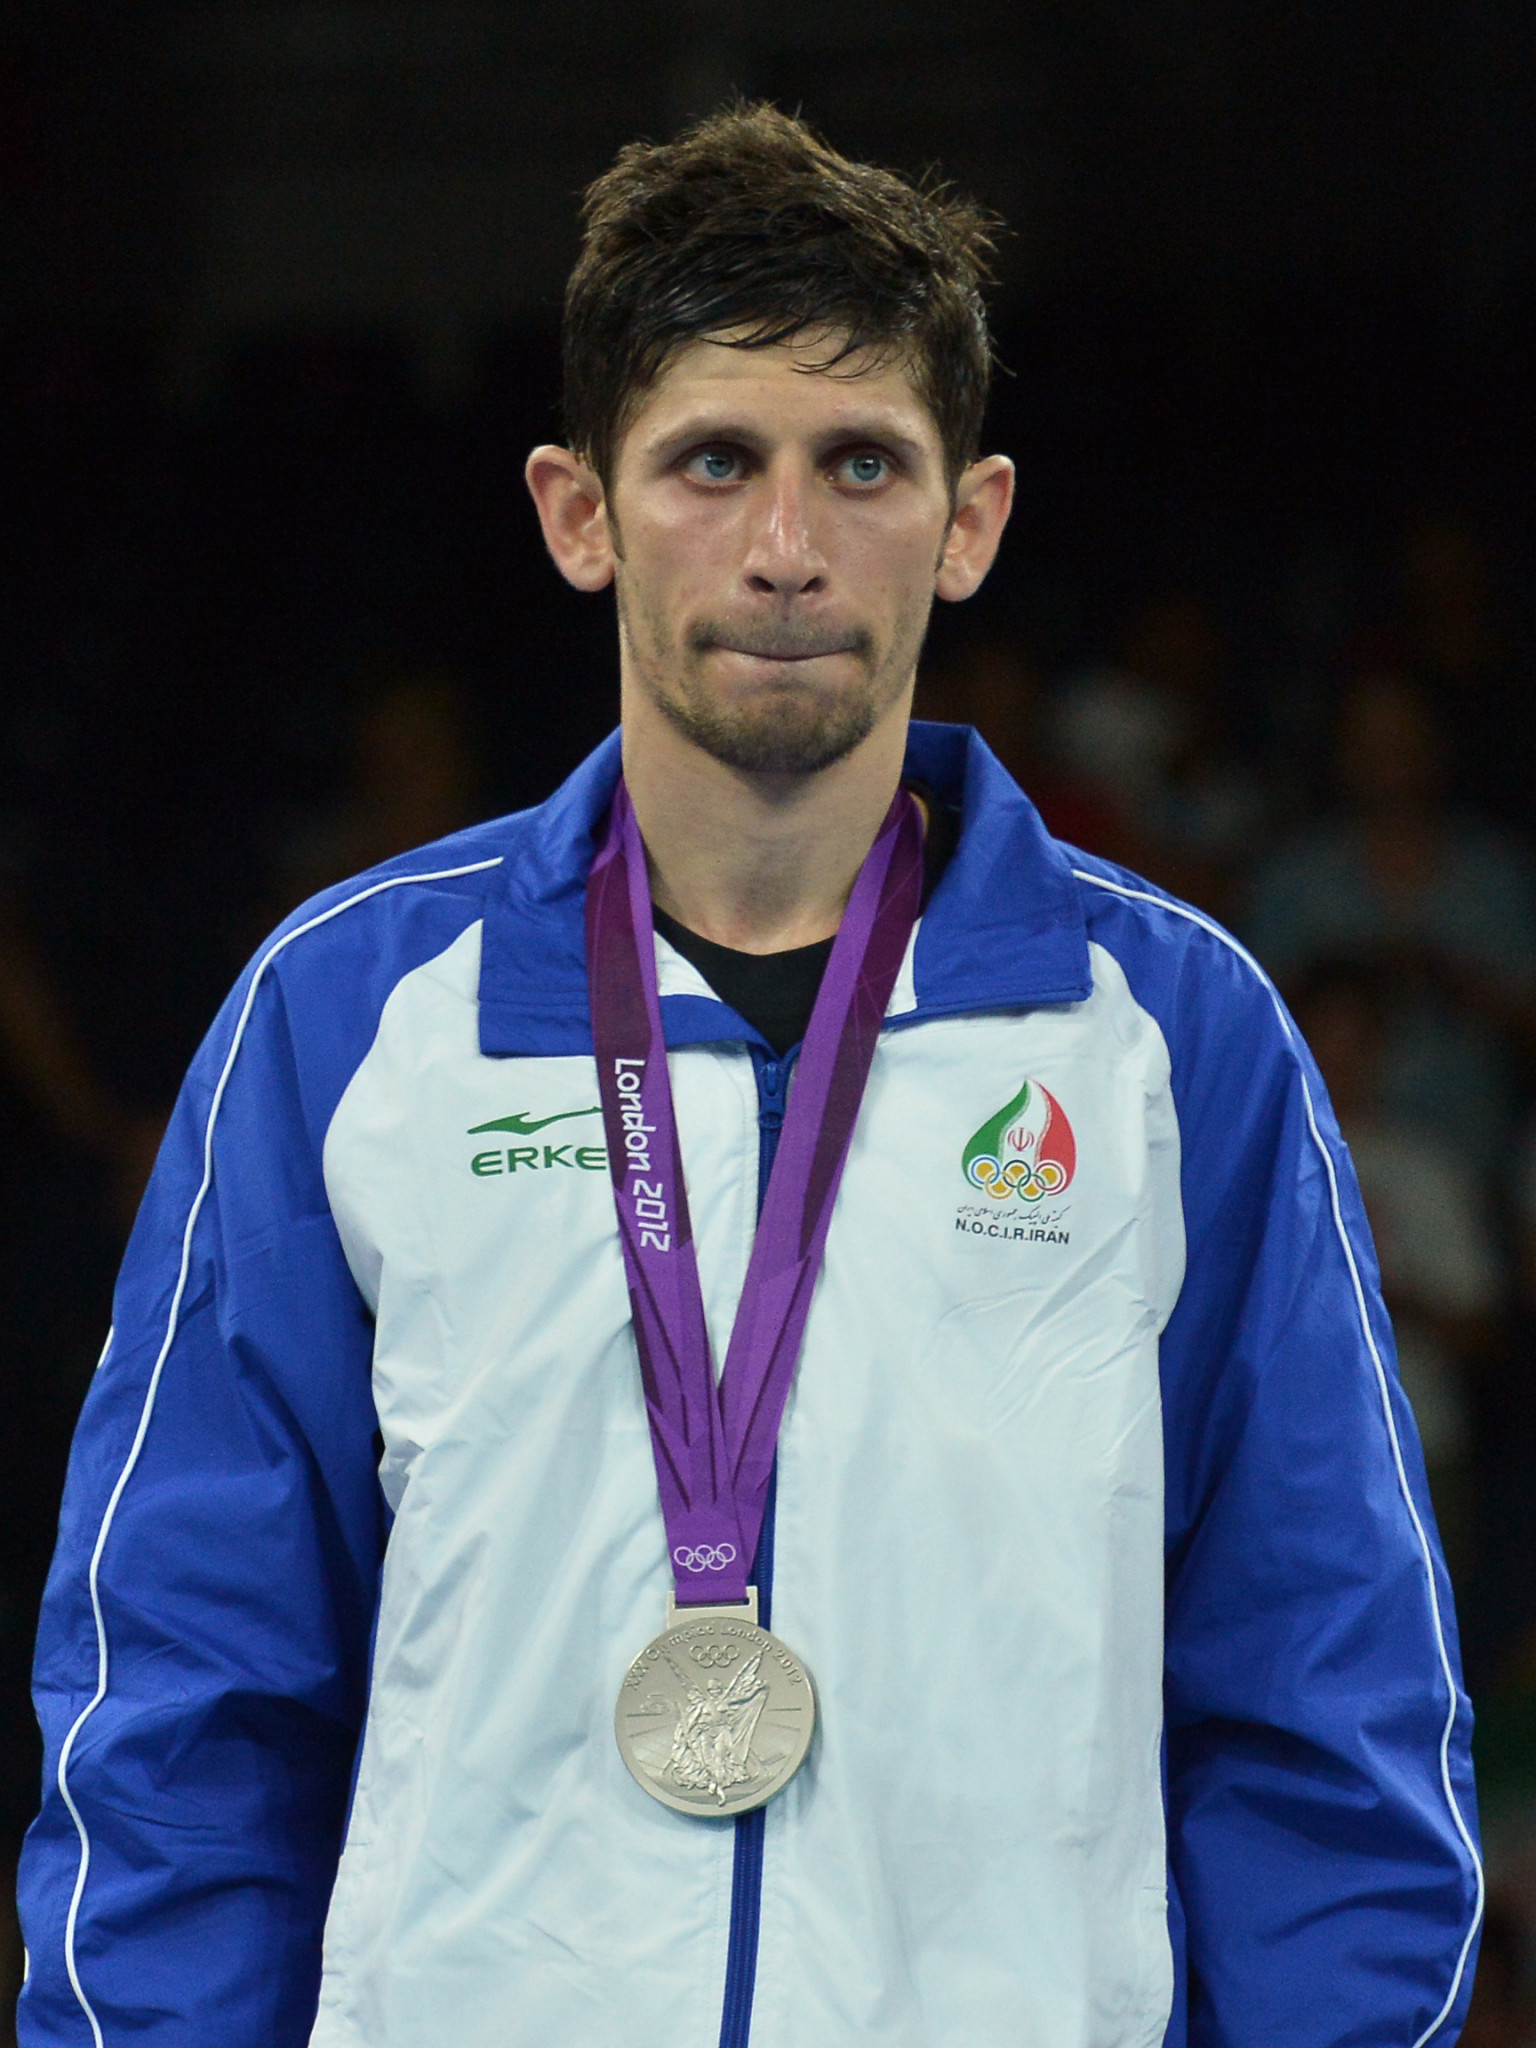 Mohammad Bagheri Motamed won silver at the London 2012 Olympics in the 68kg category ©Getty Images